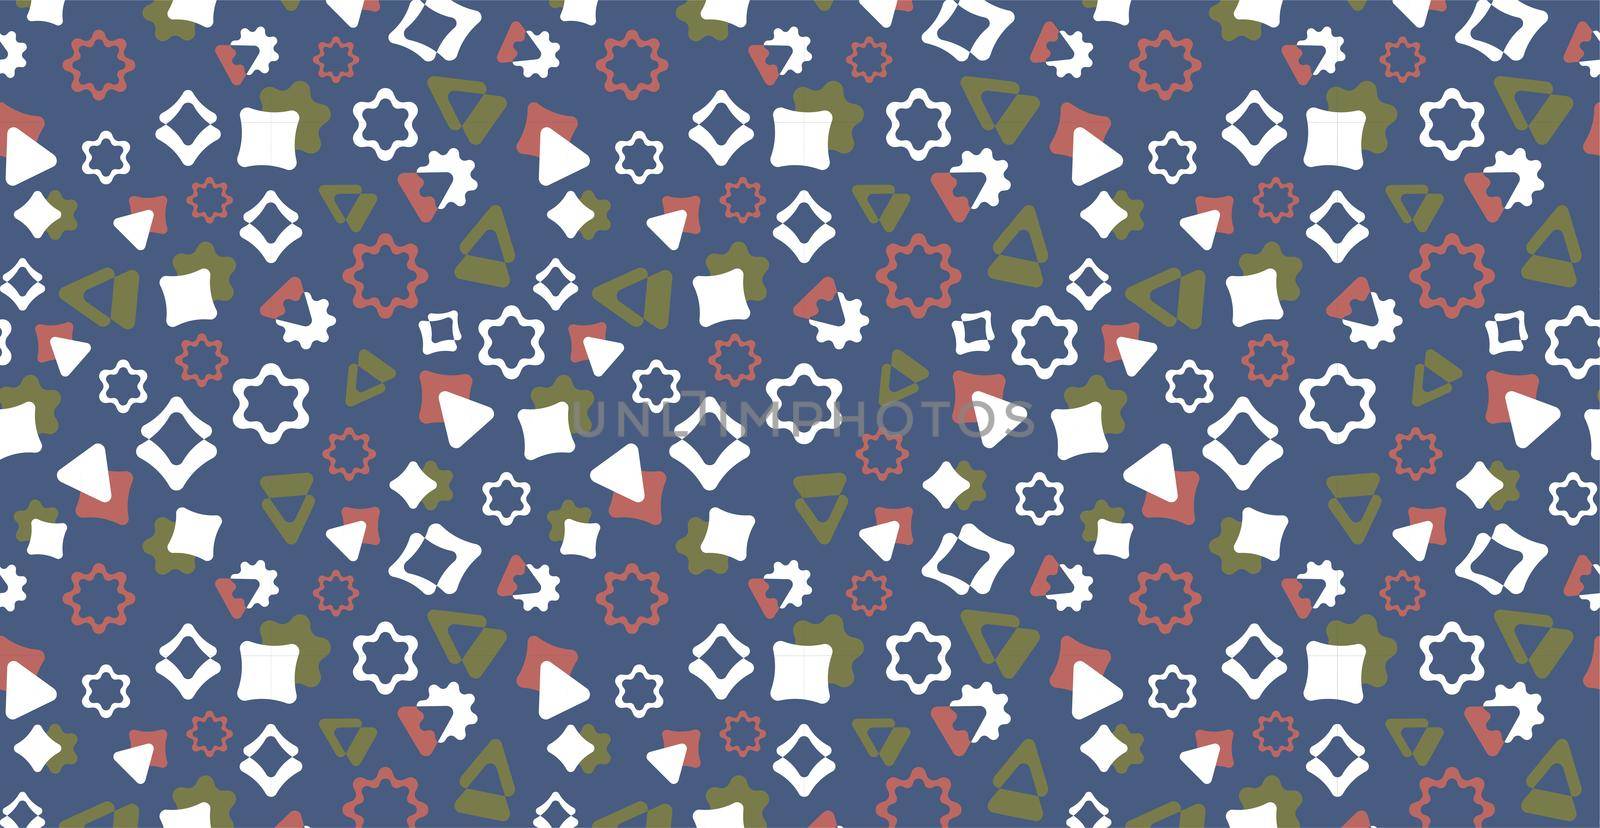 Cute colorful doodles. Bright geometric pattern. Festive children's background. by AndreyKENO